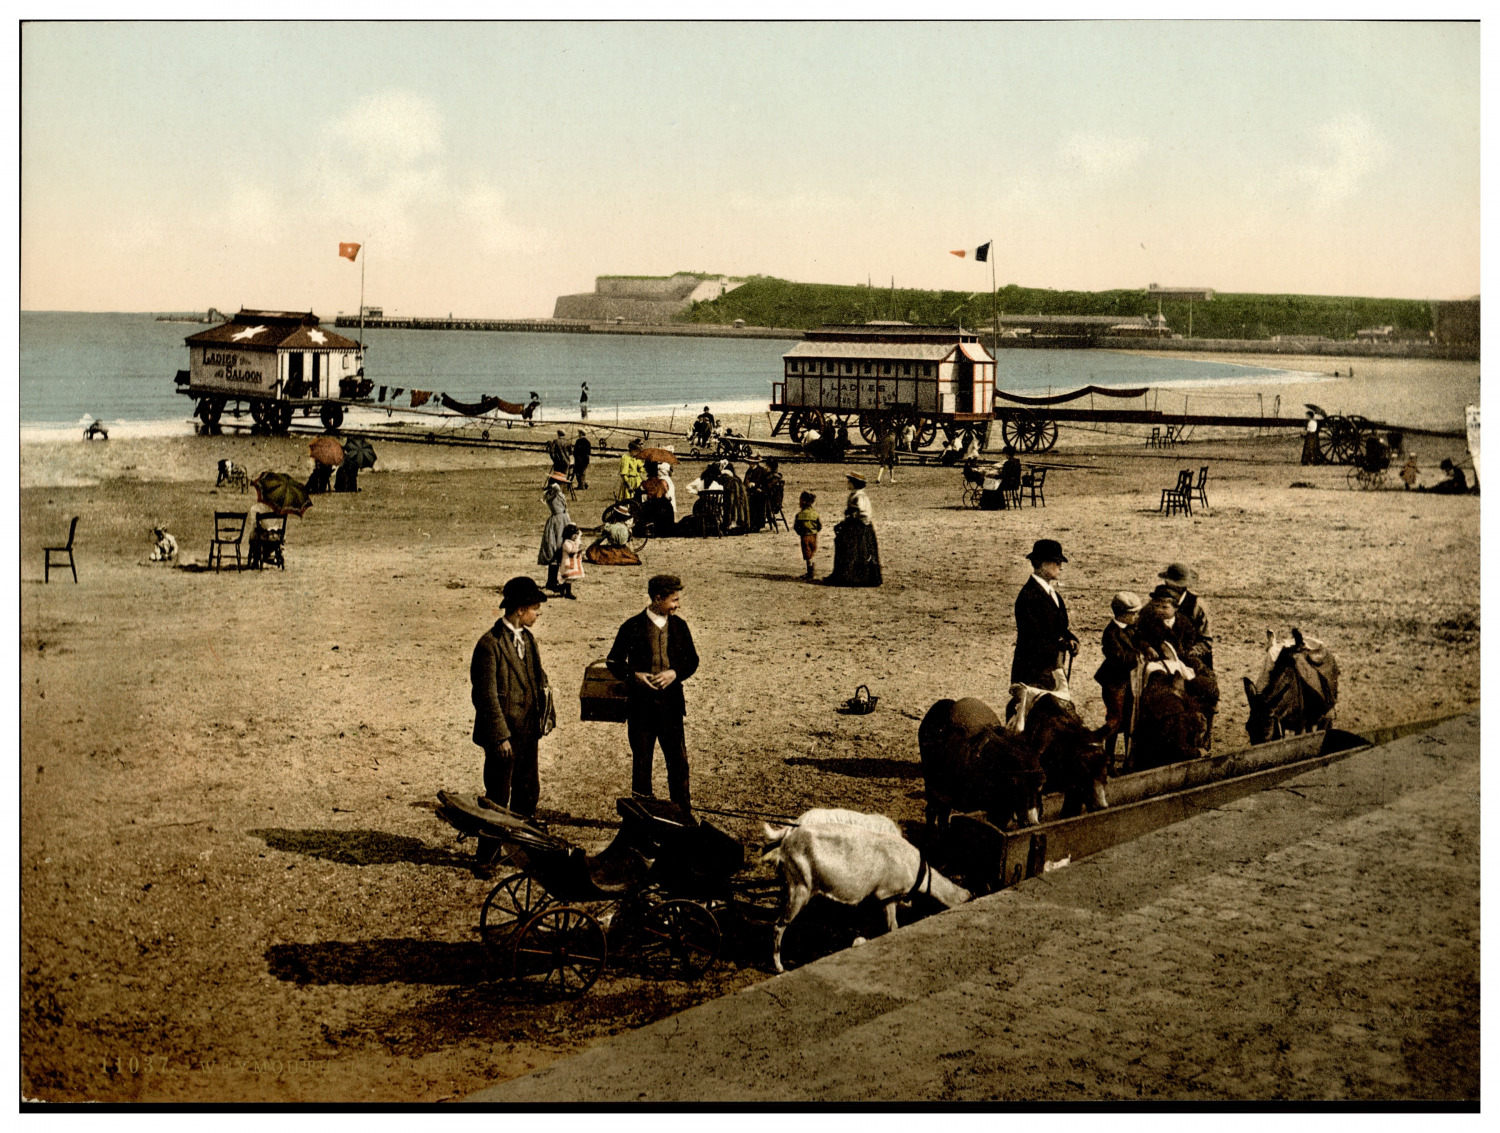 England. Weymouth. The Fort. Vintage photochrome by P.Z, photochrome Zurich p